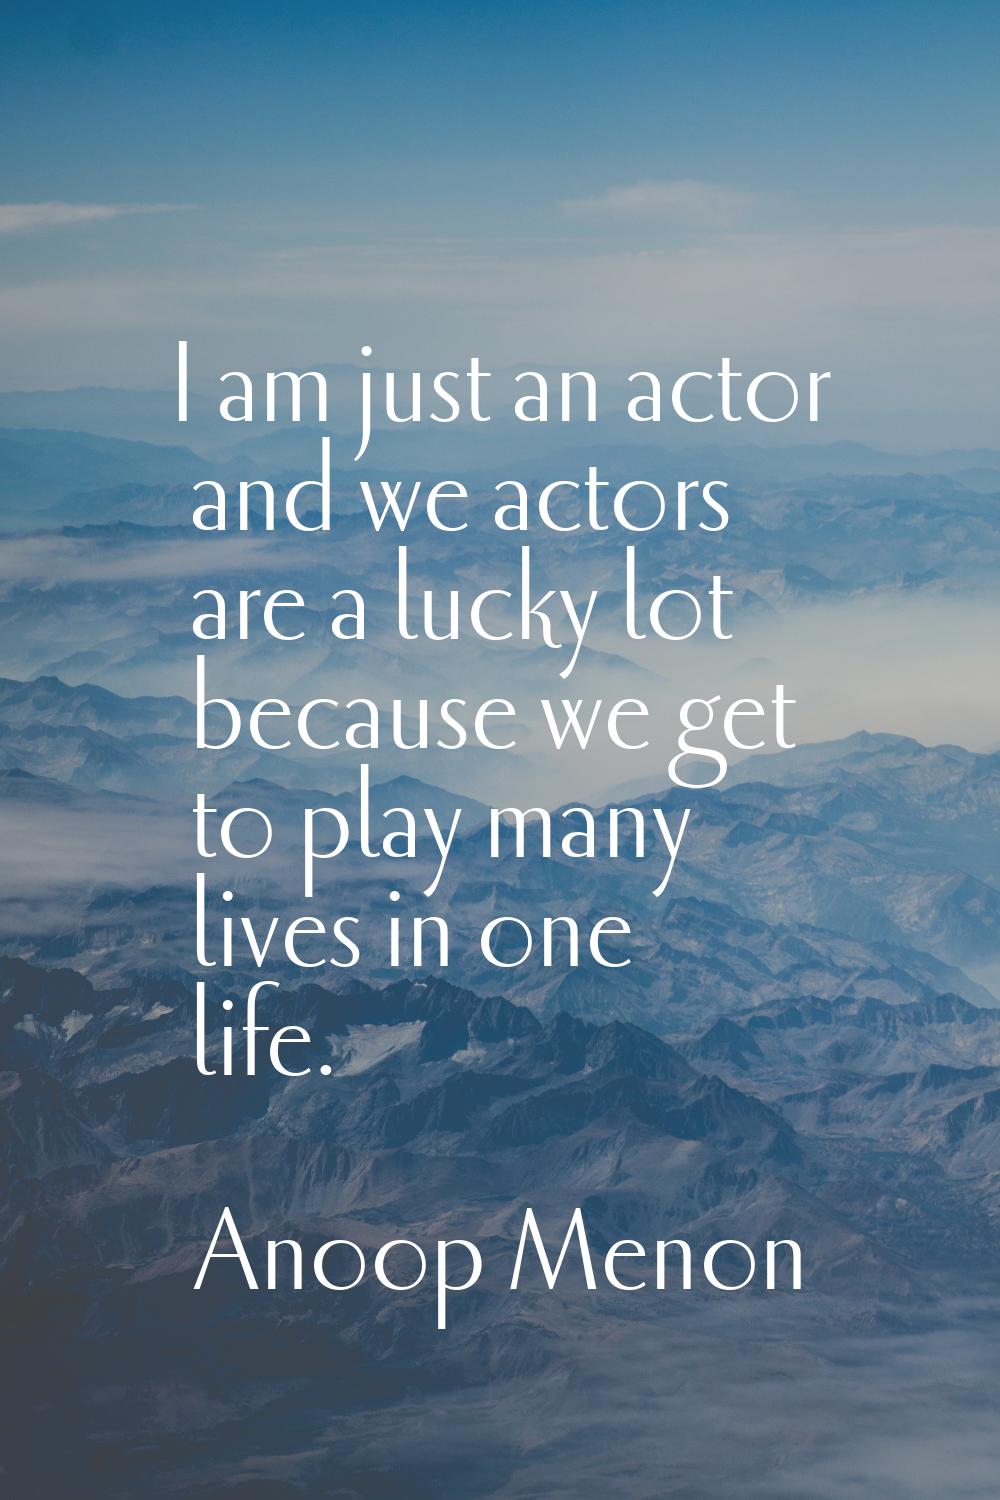 I am just an actor and we actors are a lucky lot because we get to play many lives in one life.